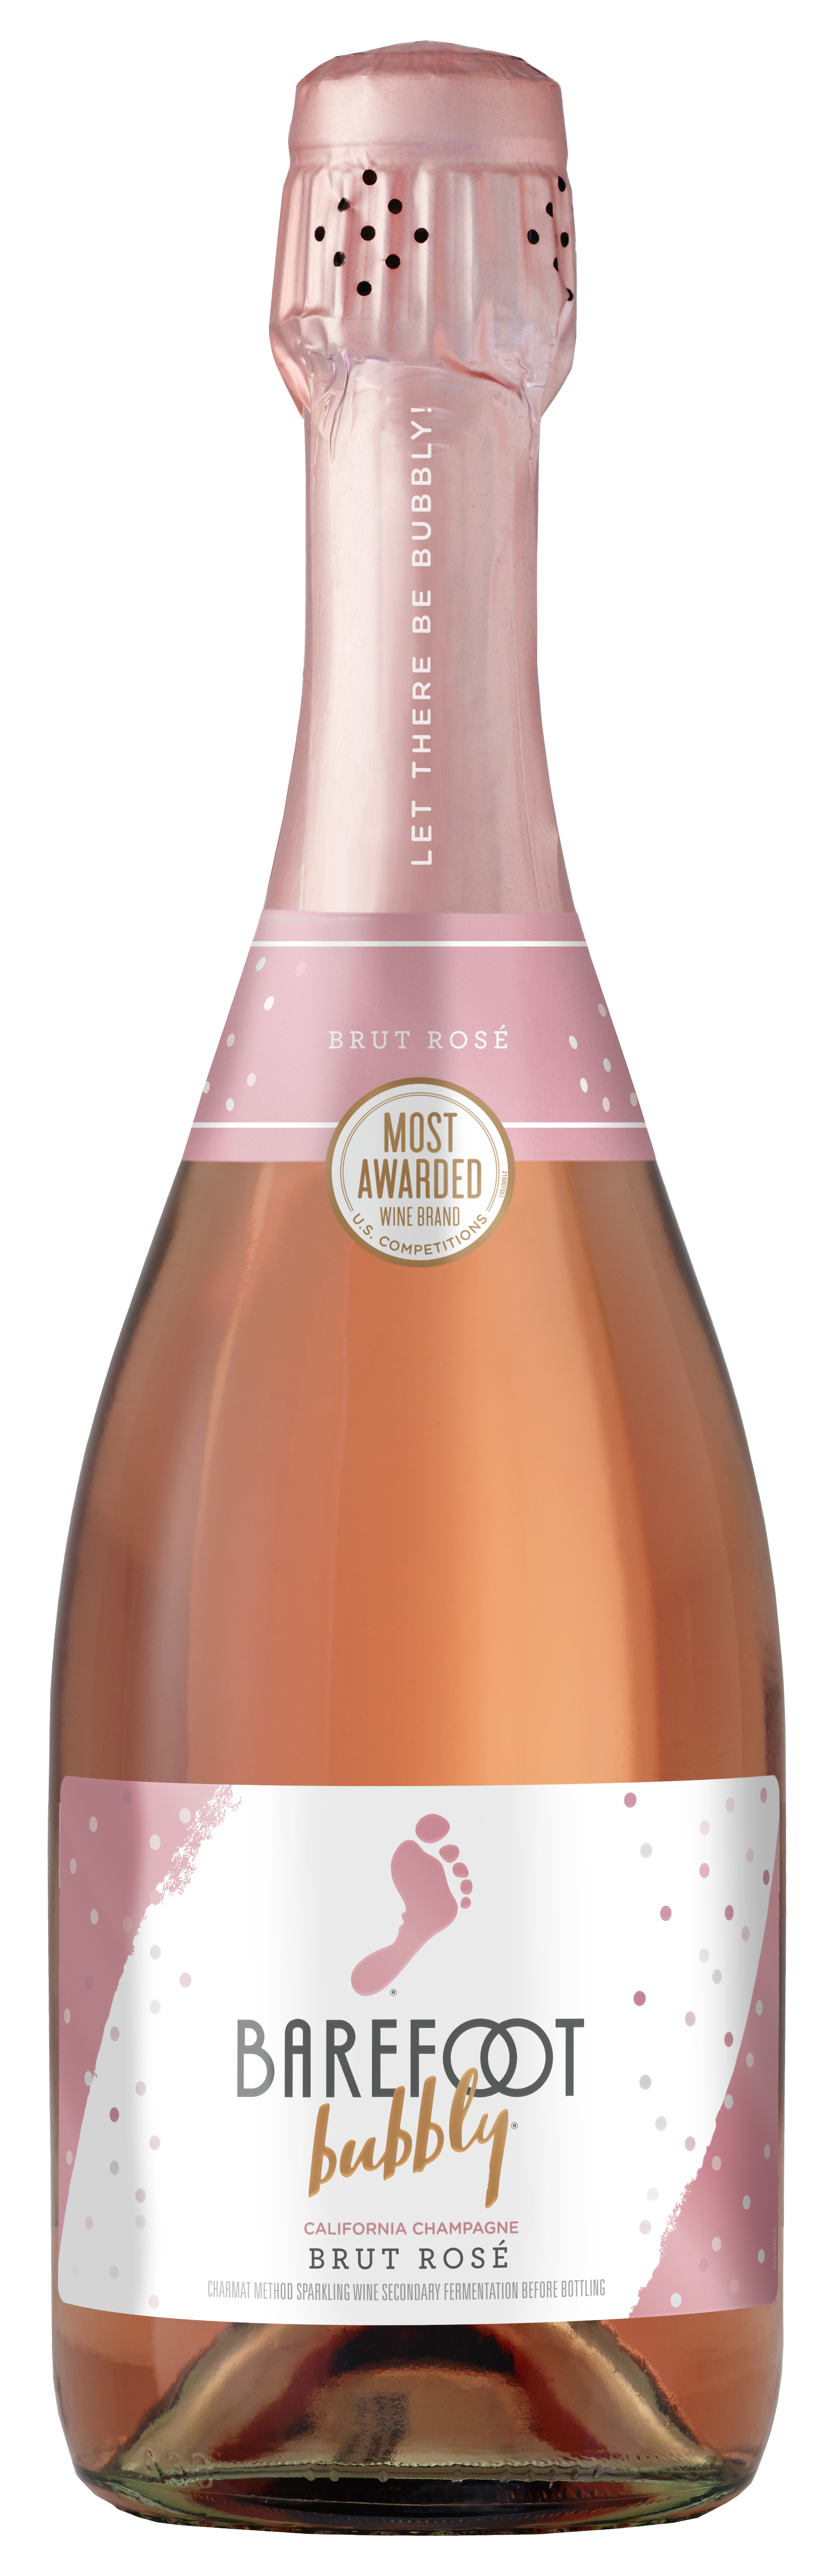 images/wine/ROSE and CHAMPAGNE/Barefoot Bubbly Brut Rose.jpg